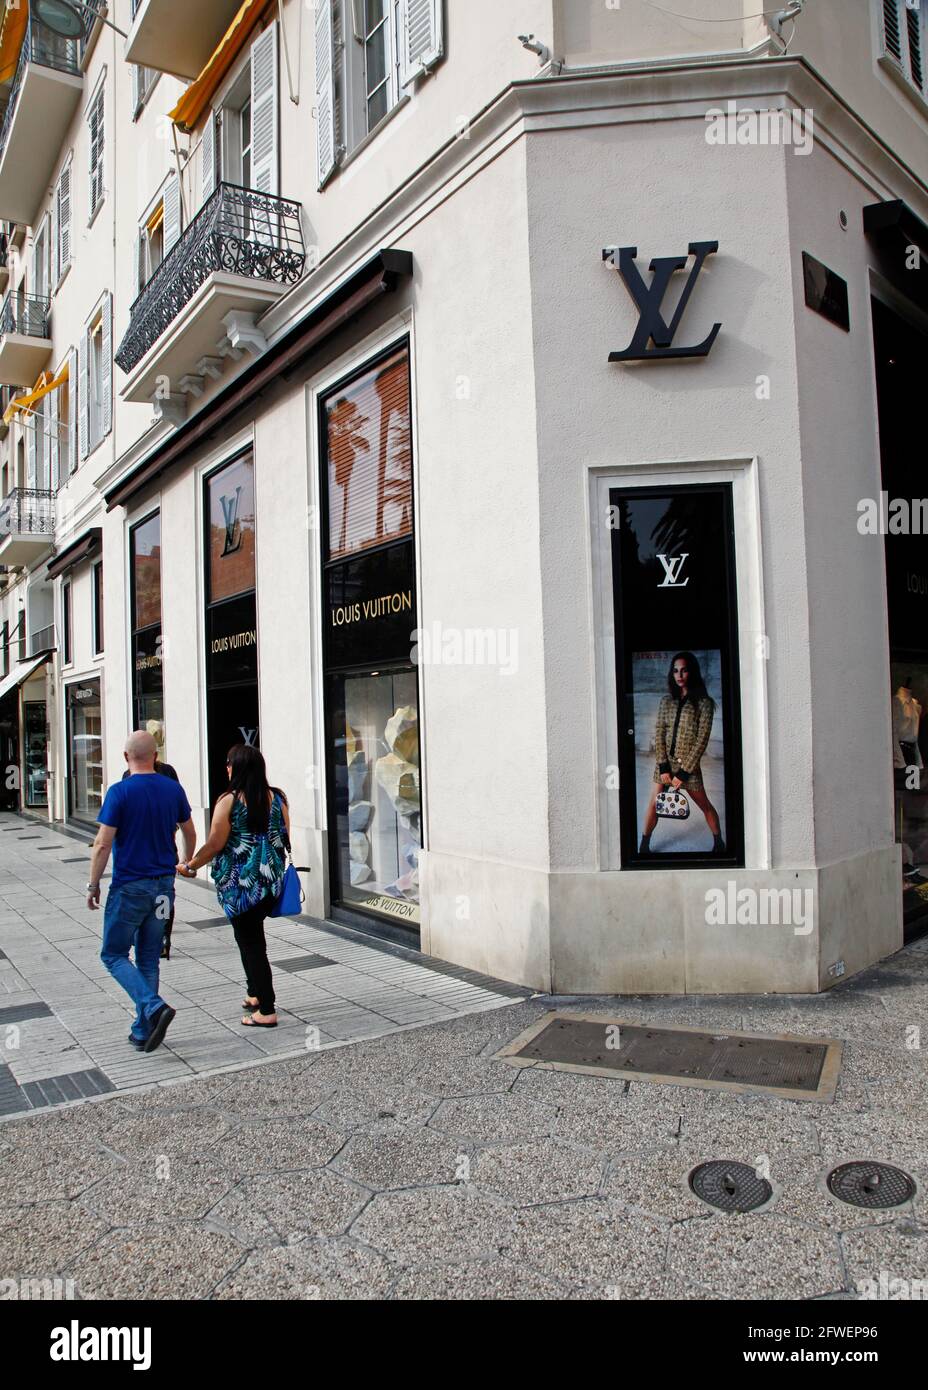 Louis Vuitton store in the city of Nice, France Stock Photo - Alamy